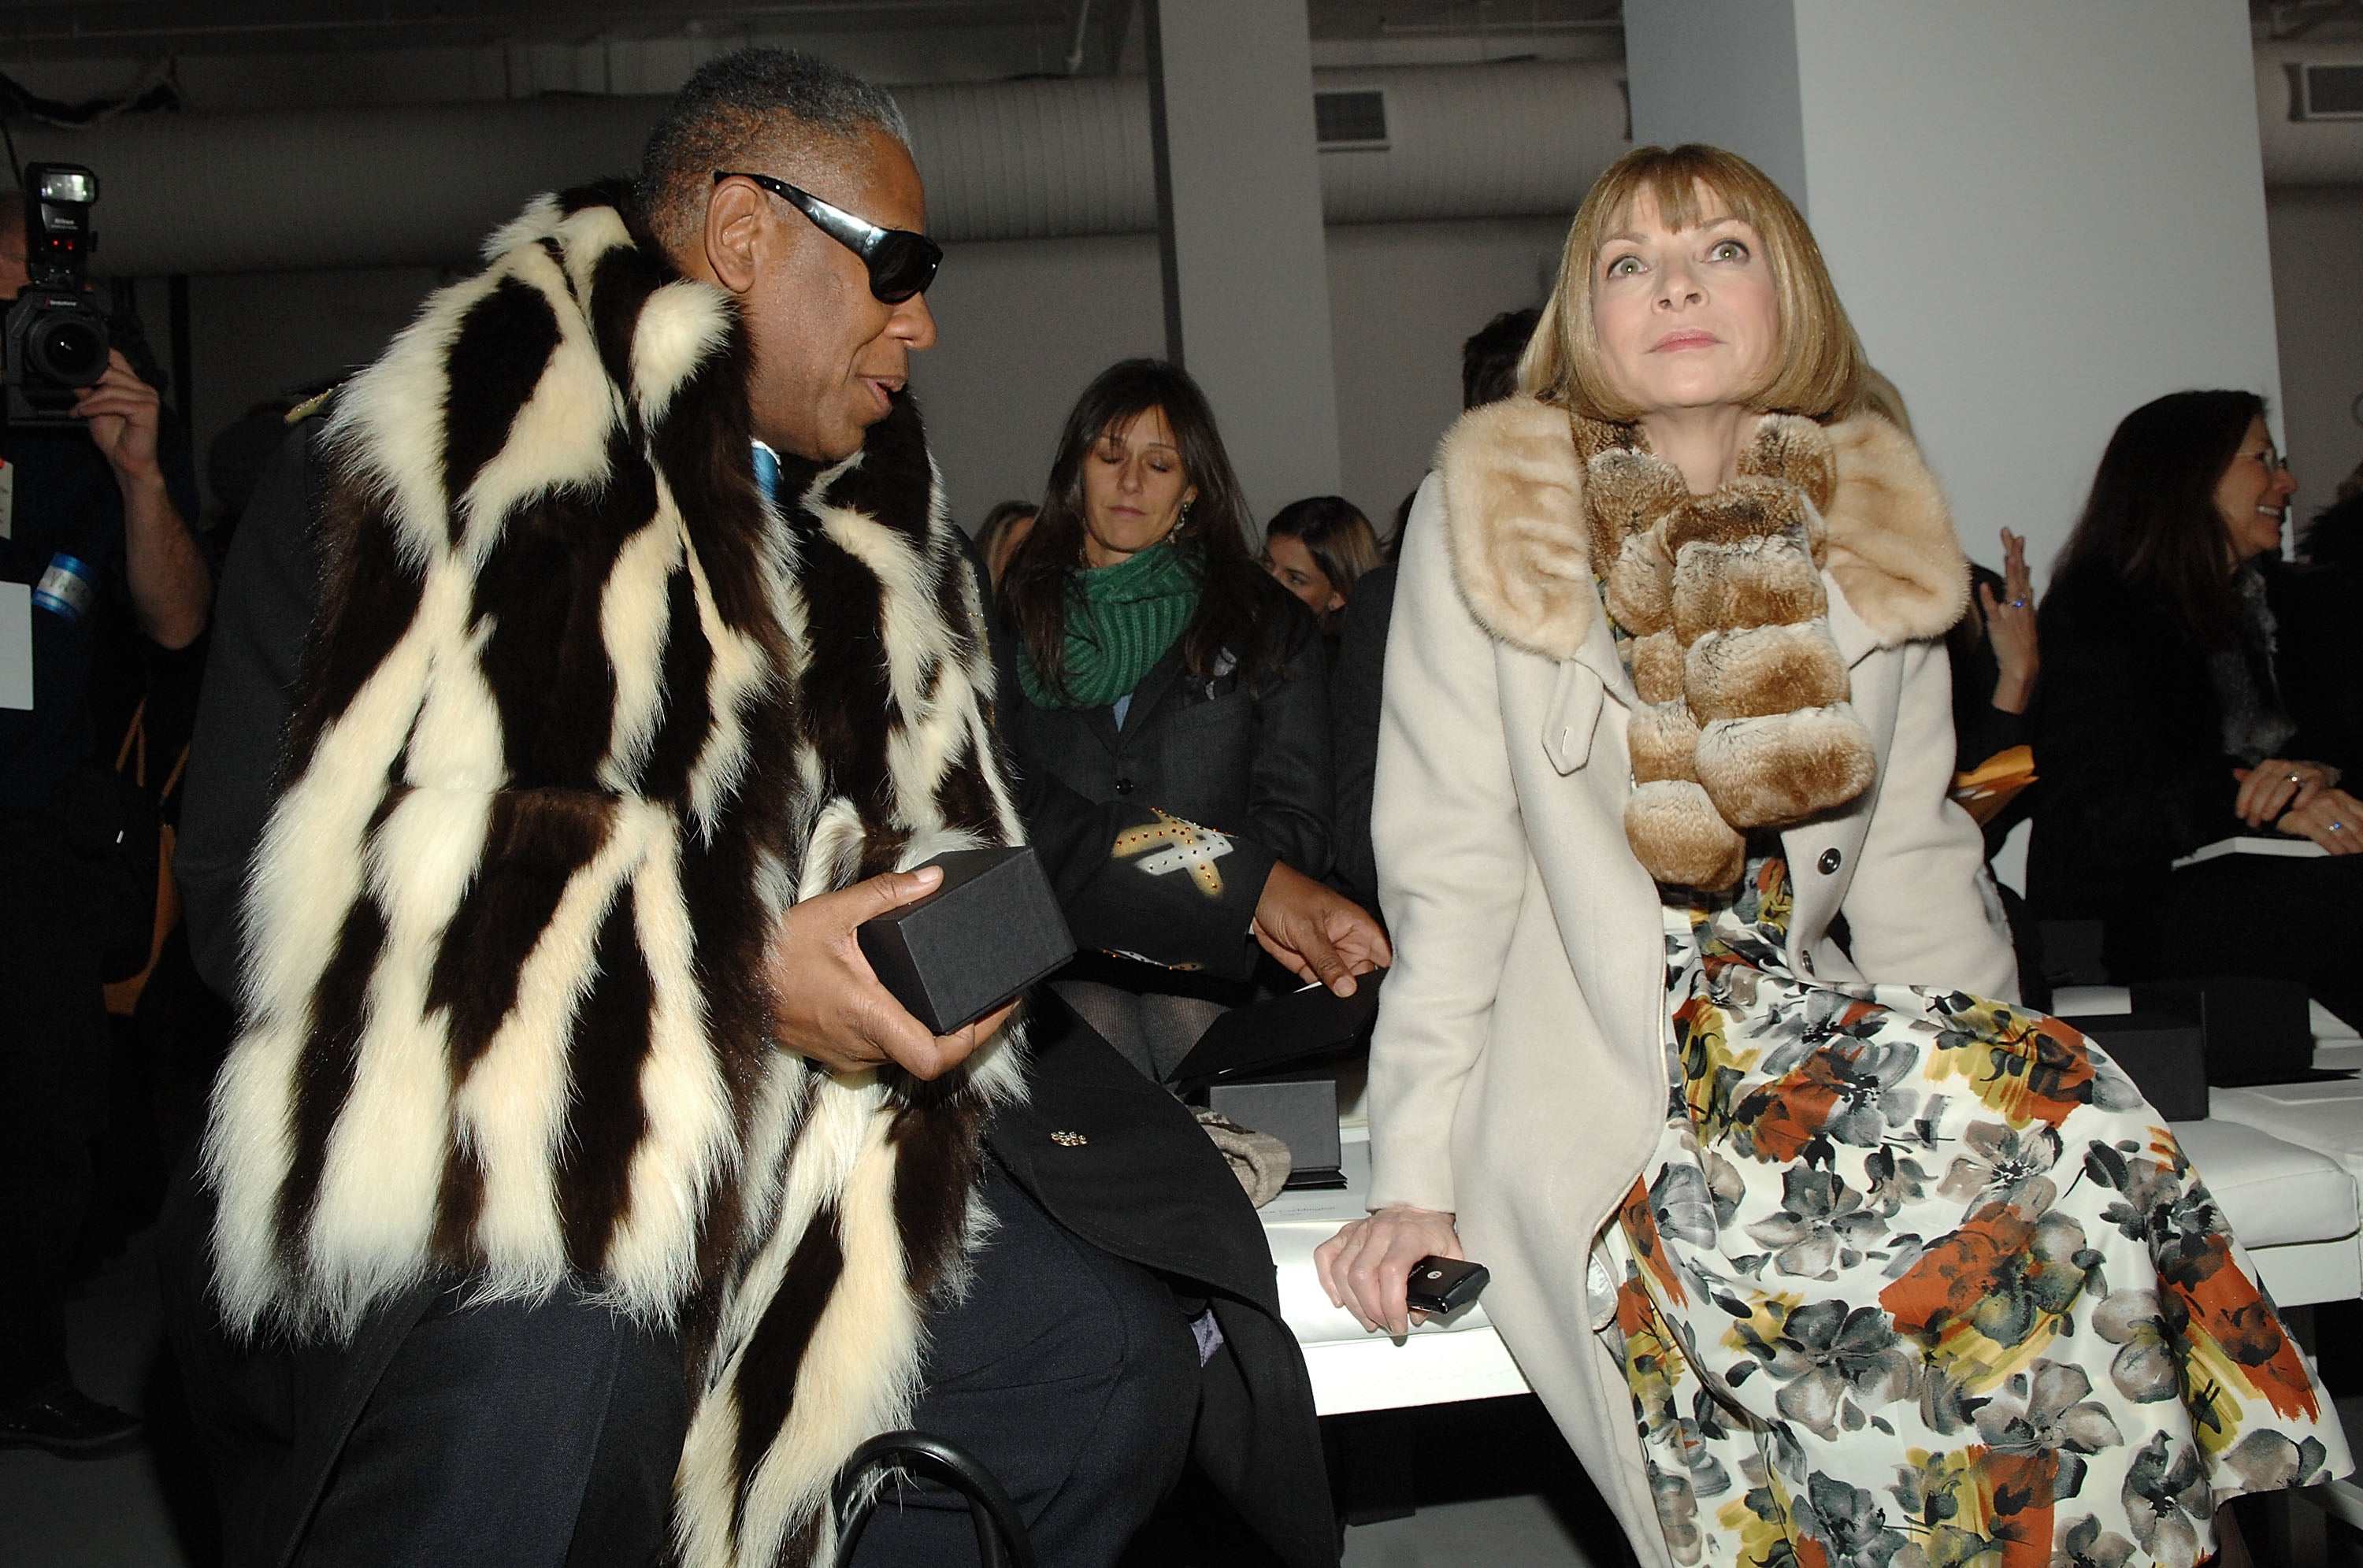 Andre Leon Talley (L) and Anna Wintour attend the Calvin Klein Fall 2007 fashion show during Mercedes-Benz Fashion Week February 8, 2007 in New York City